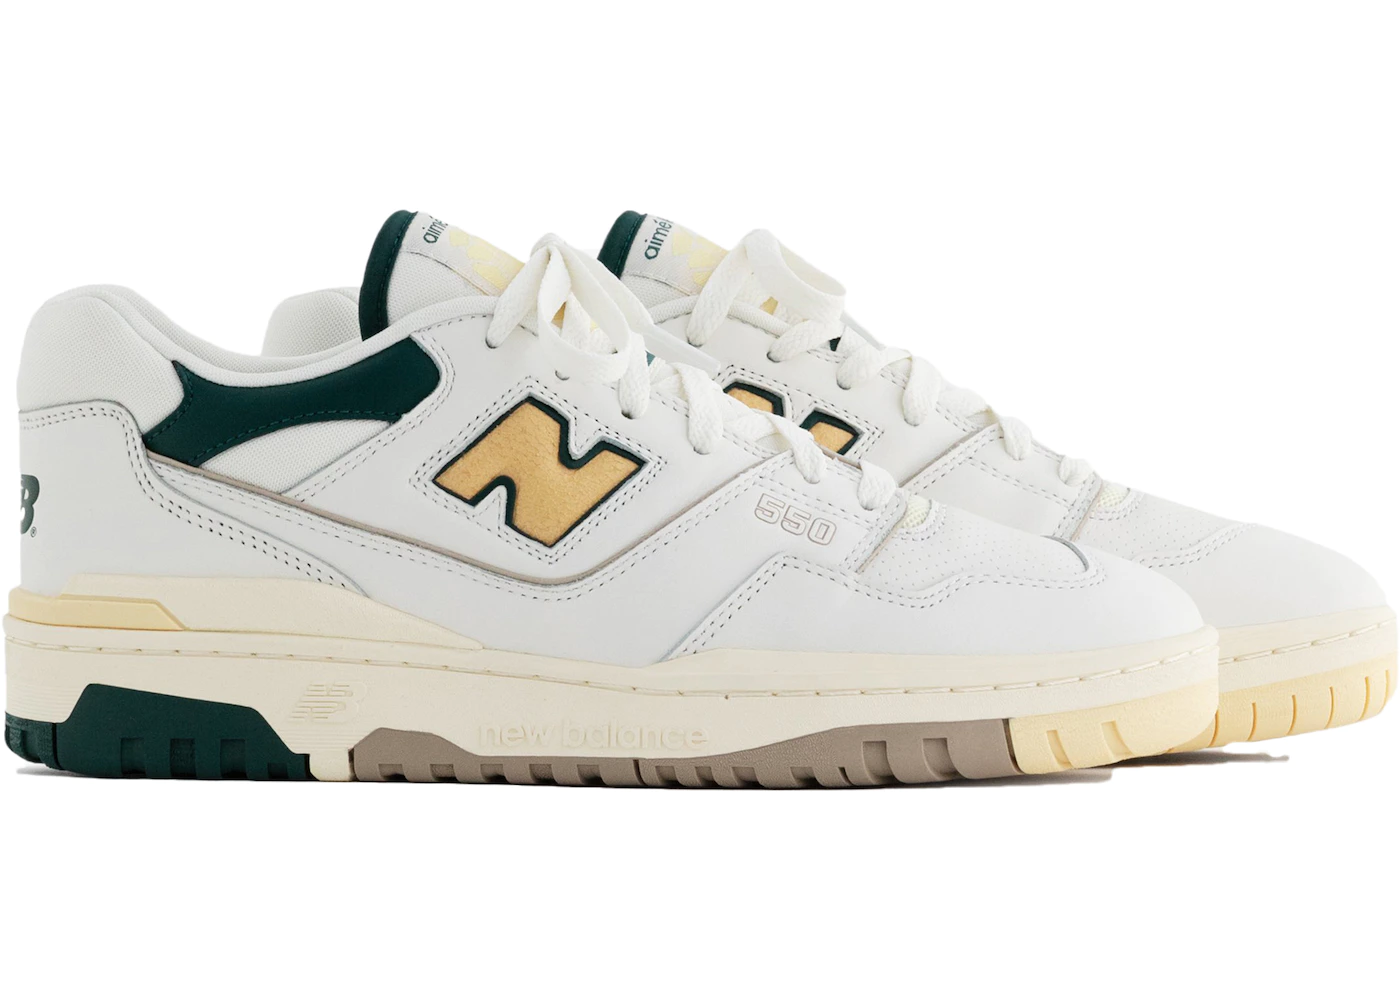 New Balance 550 Aime Leon Dore Natural Green - Sneakers